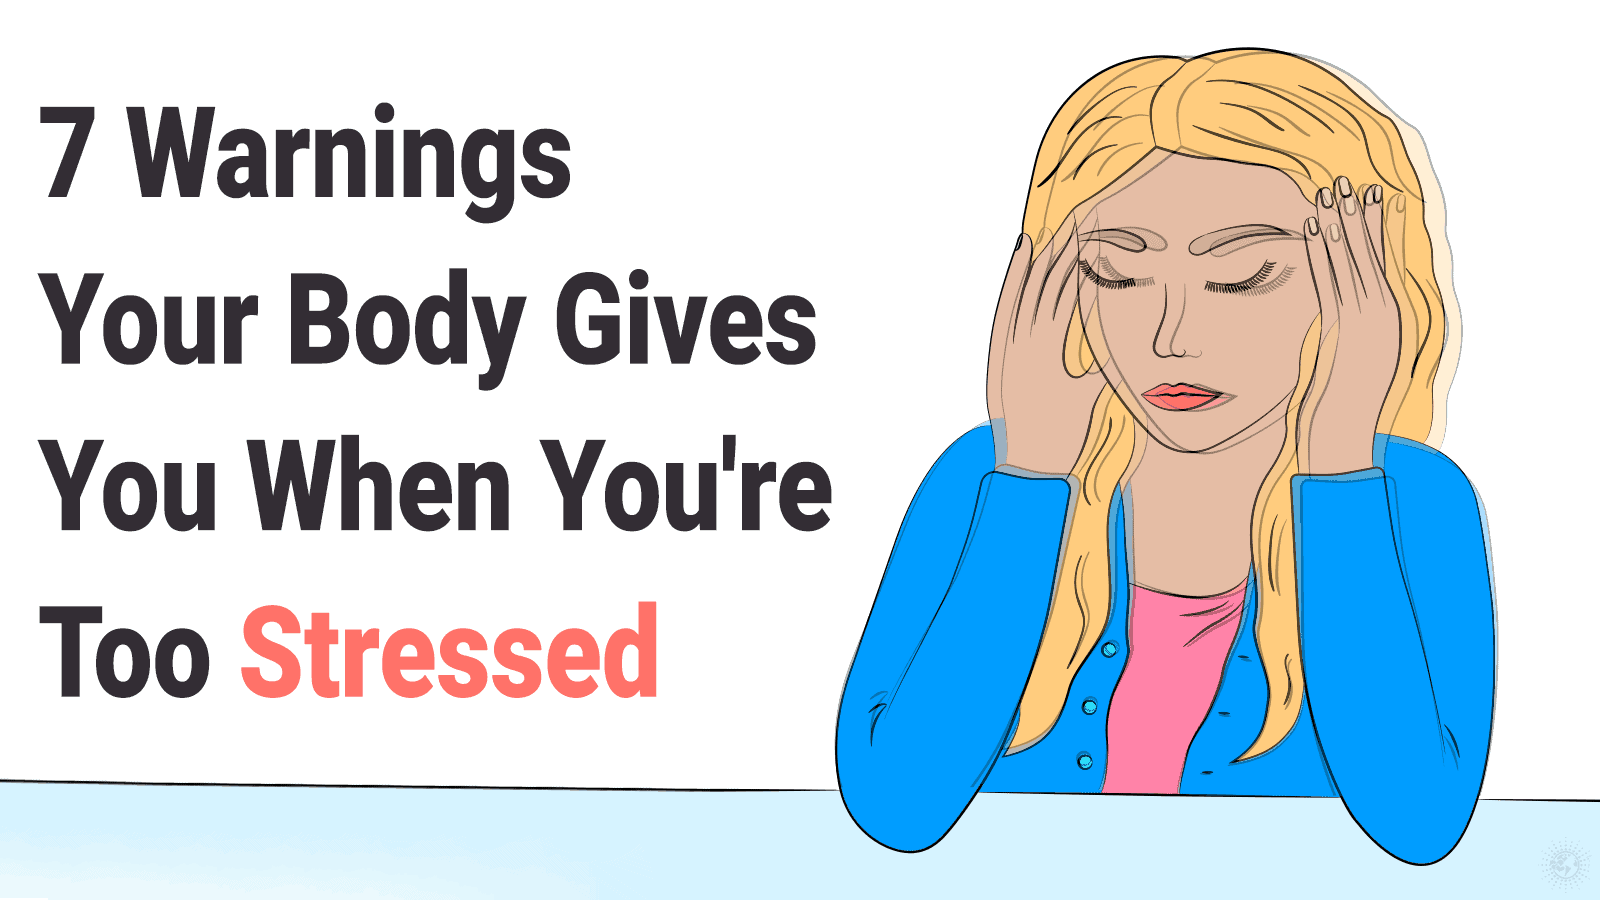 7 Warnings Your Body Gives You When You’re Too Stressed